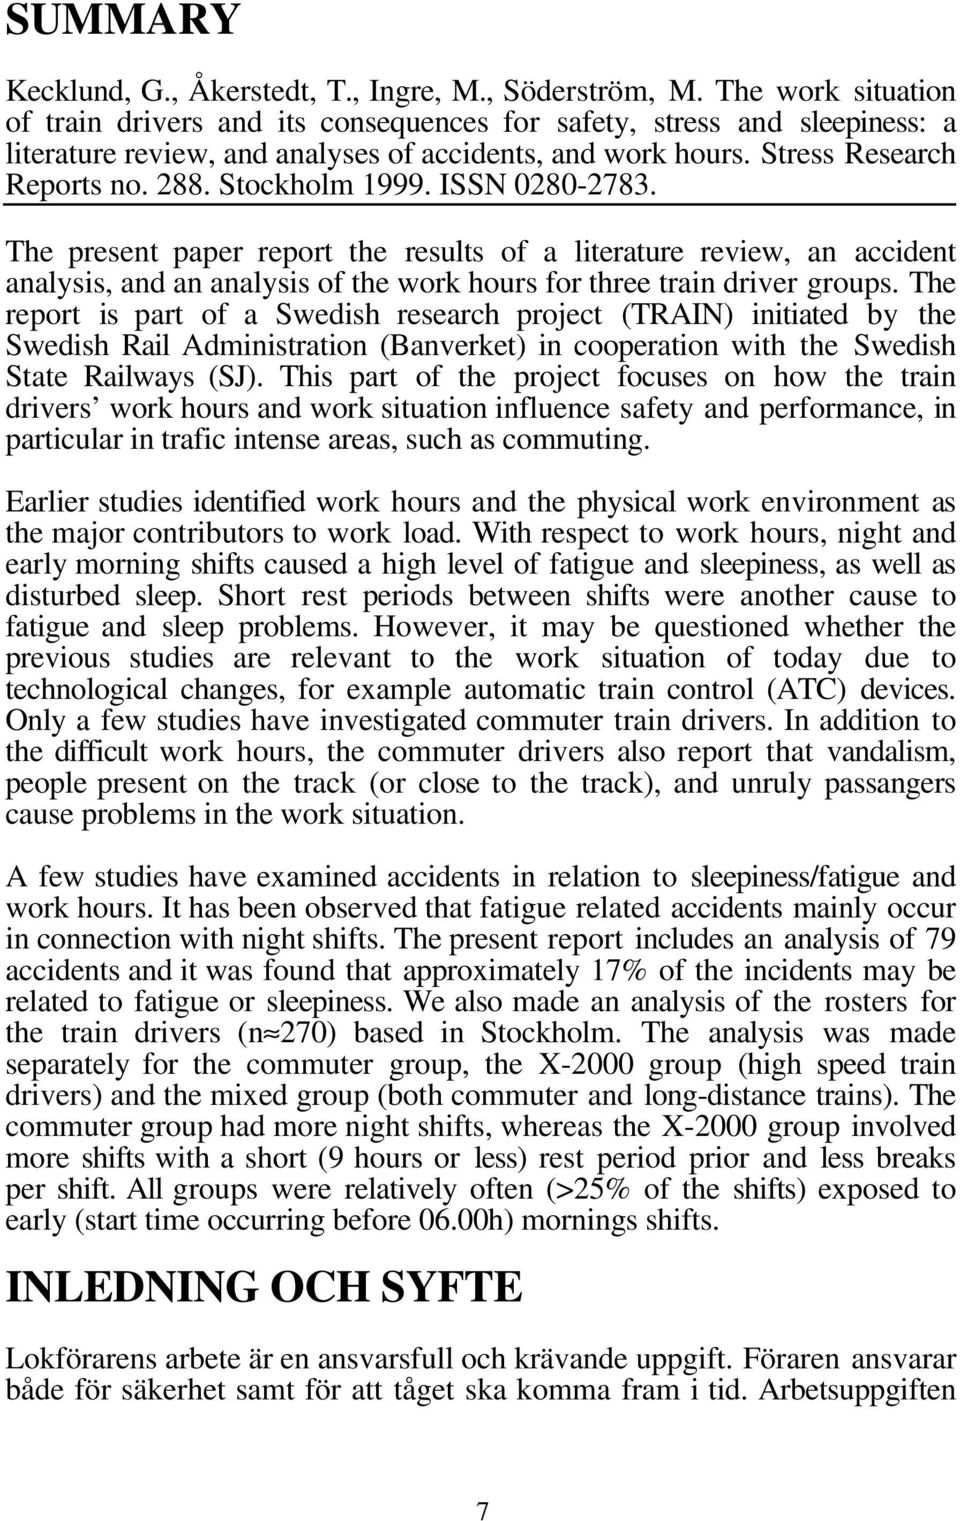 Stockholm 1999. ISSN 0280-2783. The present paper report the results of a literature review, an accident analysis, and an analysis of the work hours for three train driver groups.